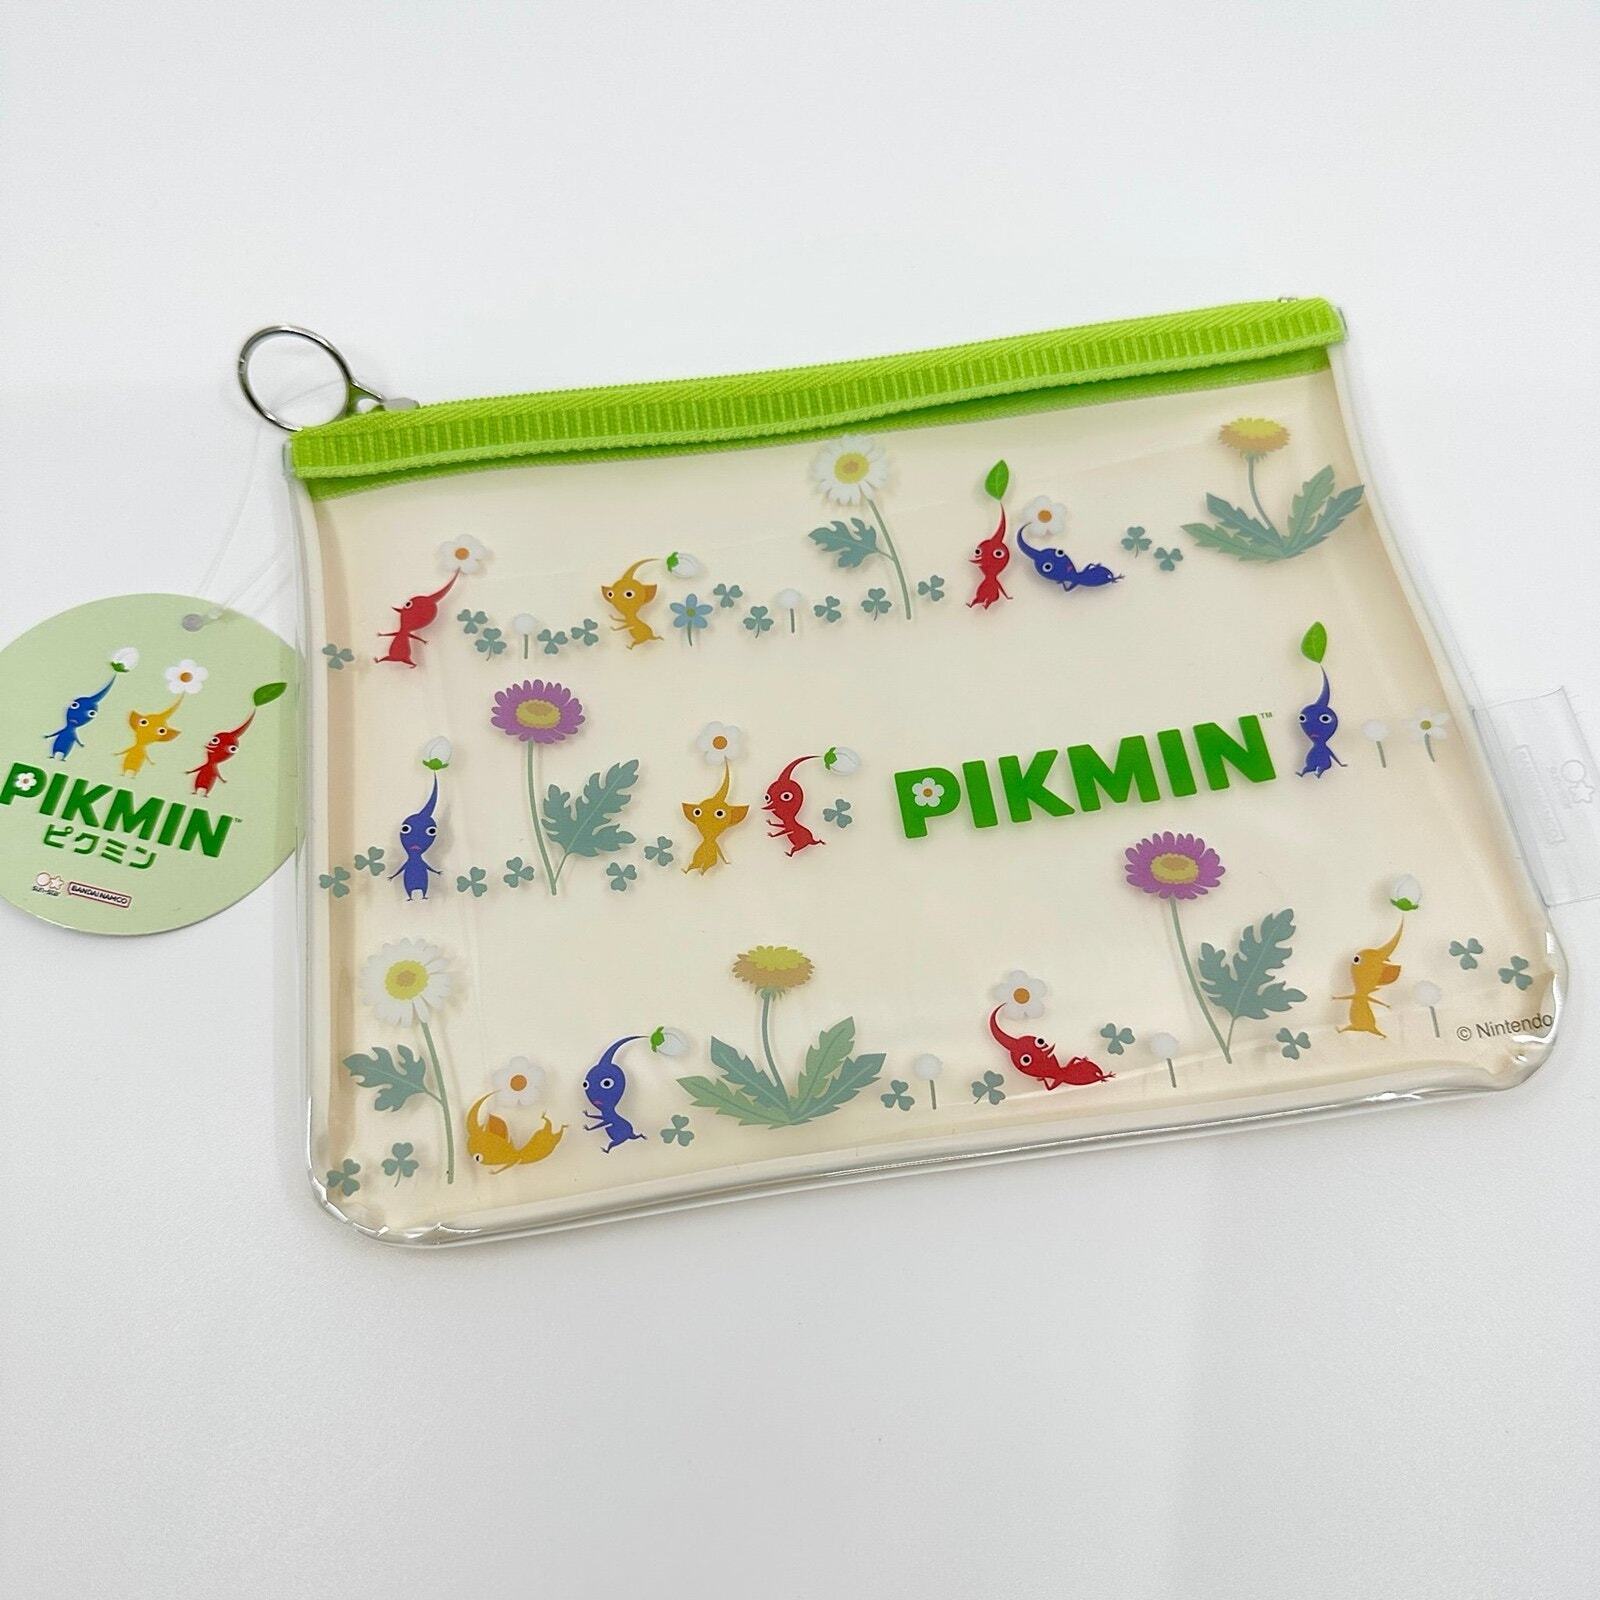 Pikmin Clear Zippered Pencil Pouch Bag Nintendo Japan Exclusive New